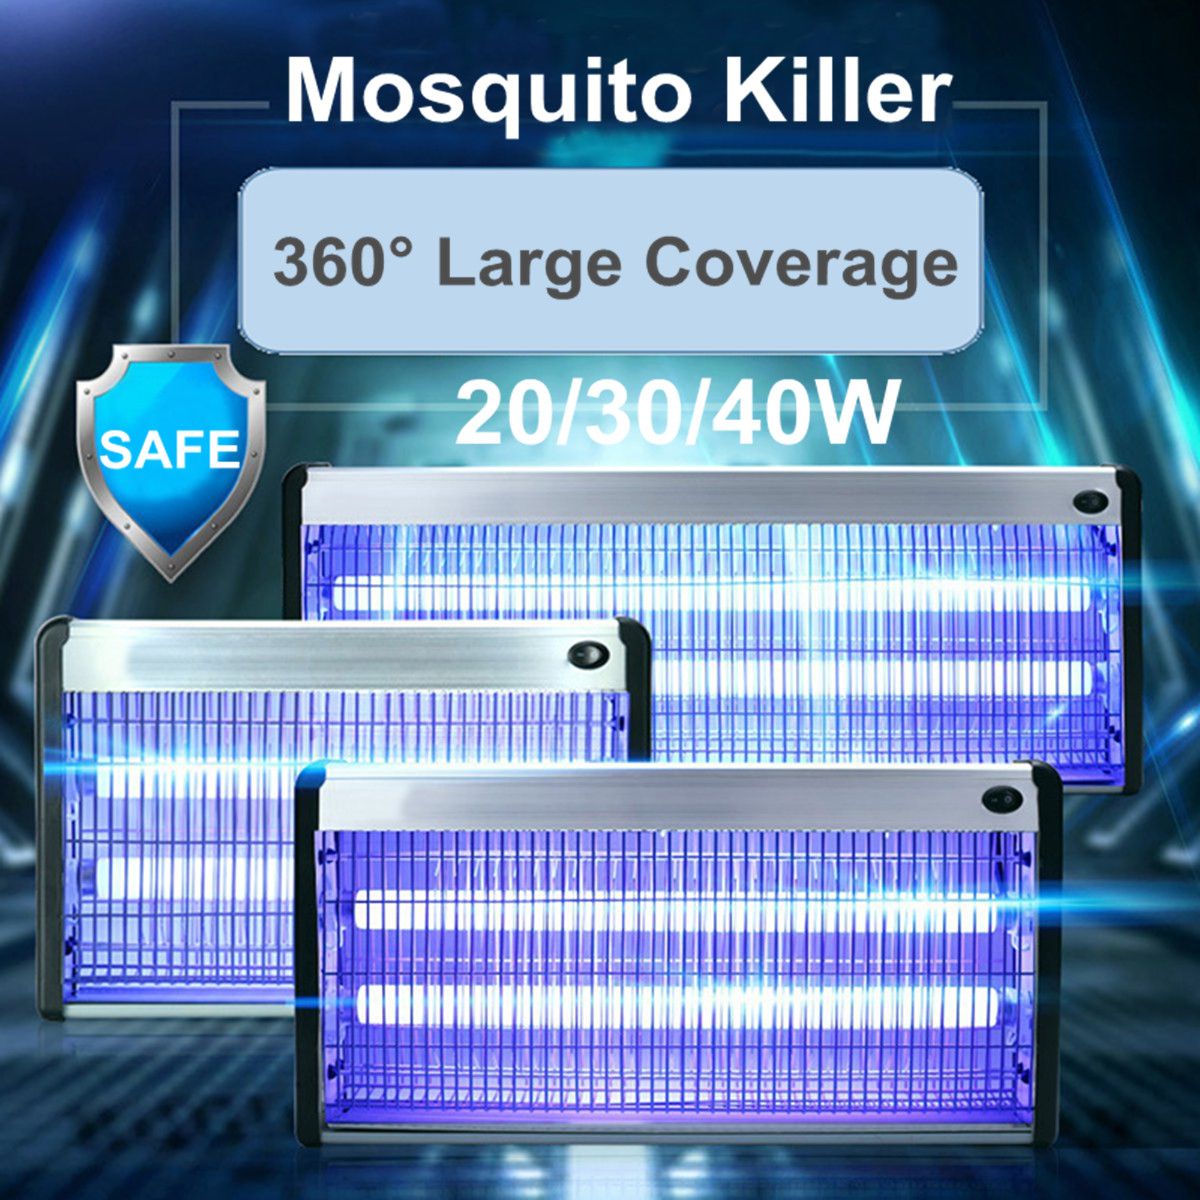 203040W-Electric-LED-Light-Mosquito-Killer-UV-A-Fly-Bug-Insect-Zapper-Trap-Catcher-Lamp-1421784